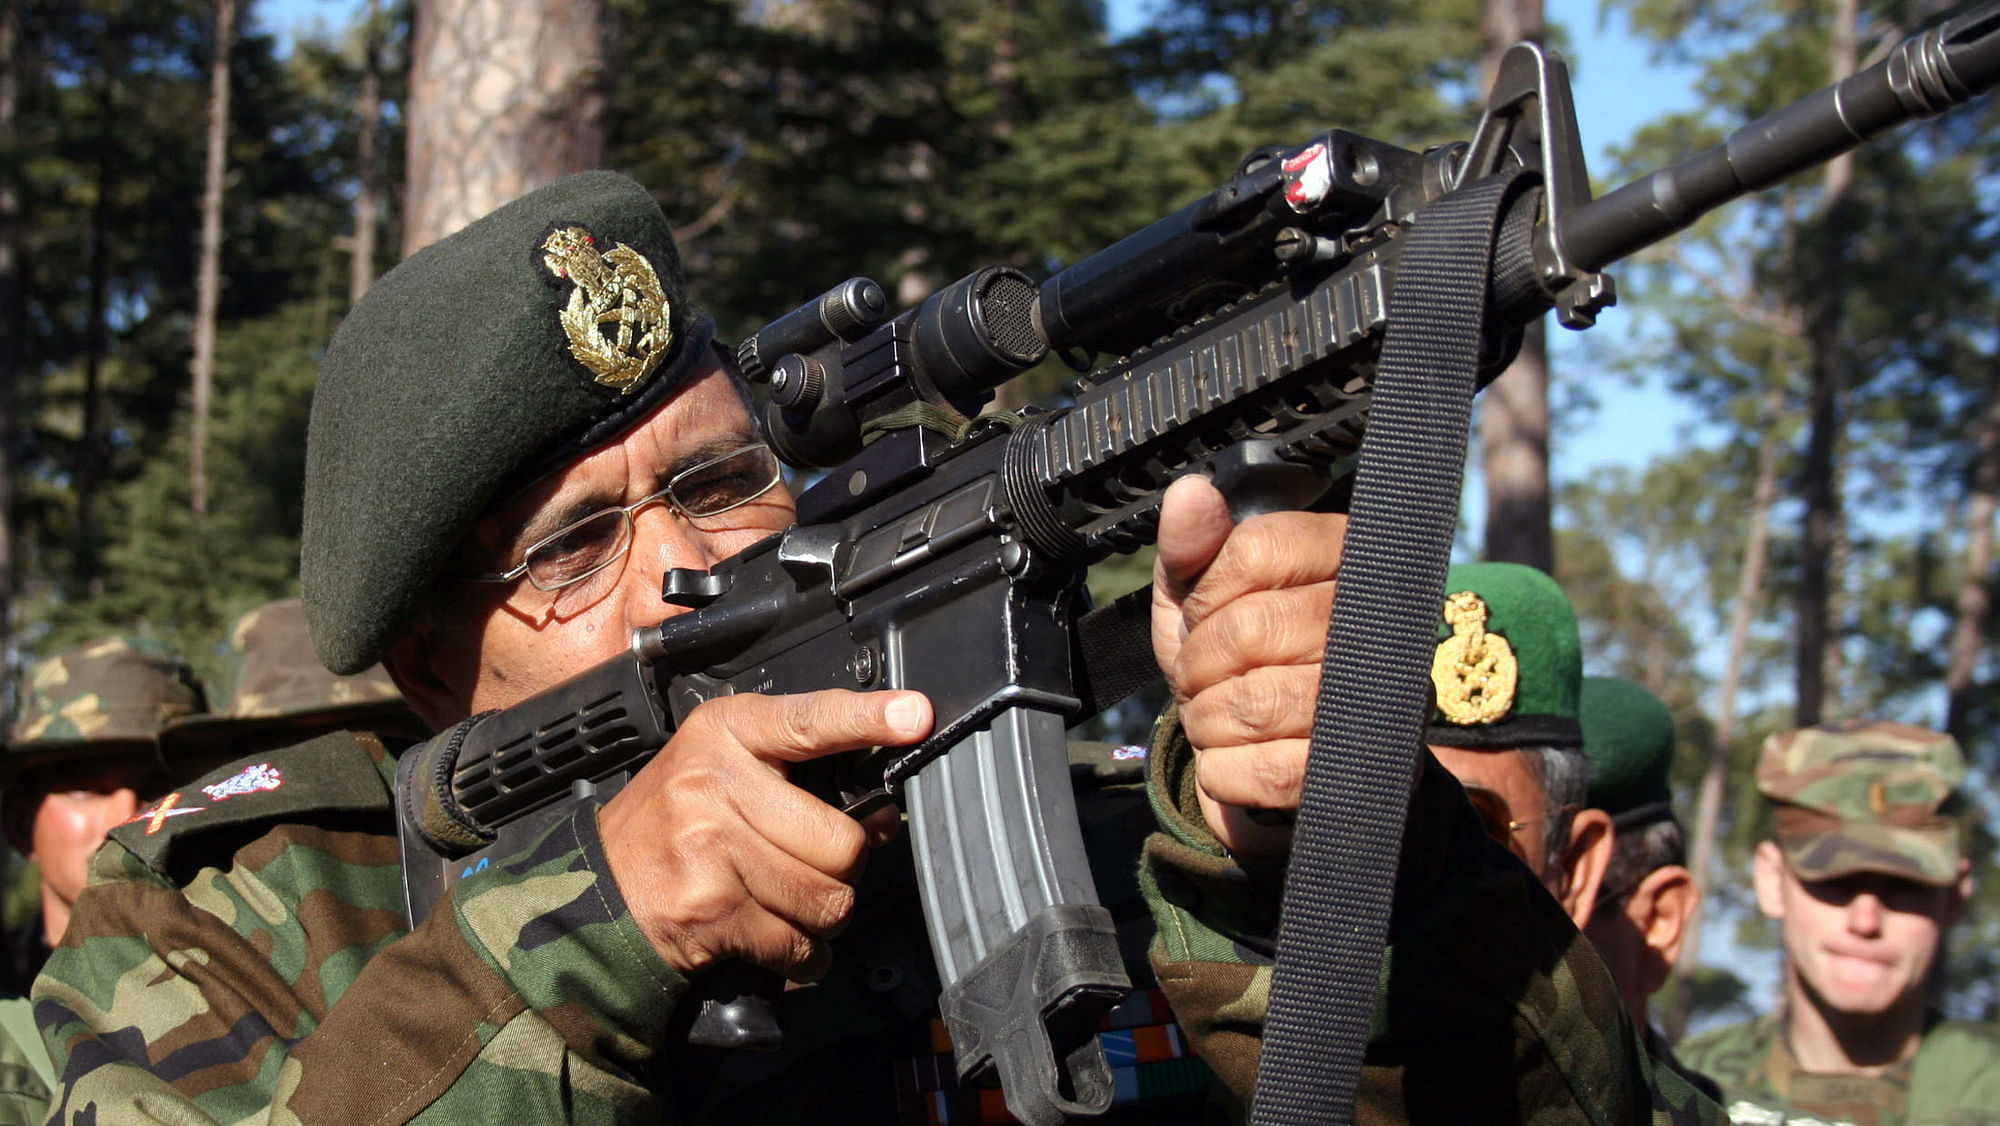 File photo of an Indian army officer inspects a US rifle during Indo-US joint exercise in Chaubattia, Uttaranchal. (Photo: Reuters)